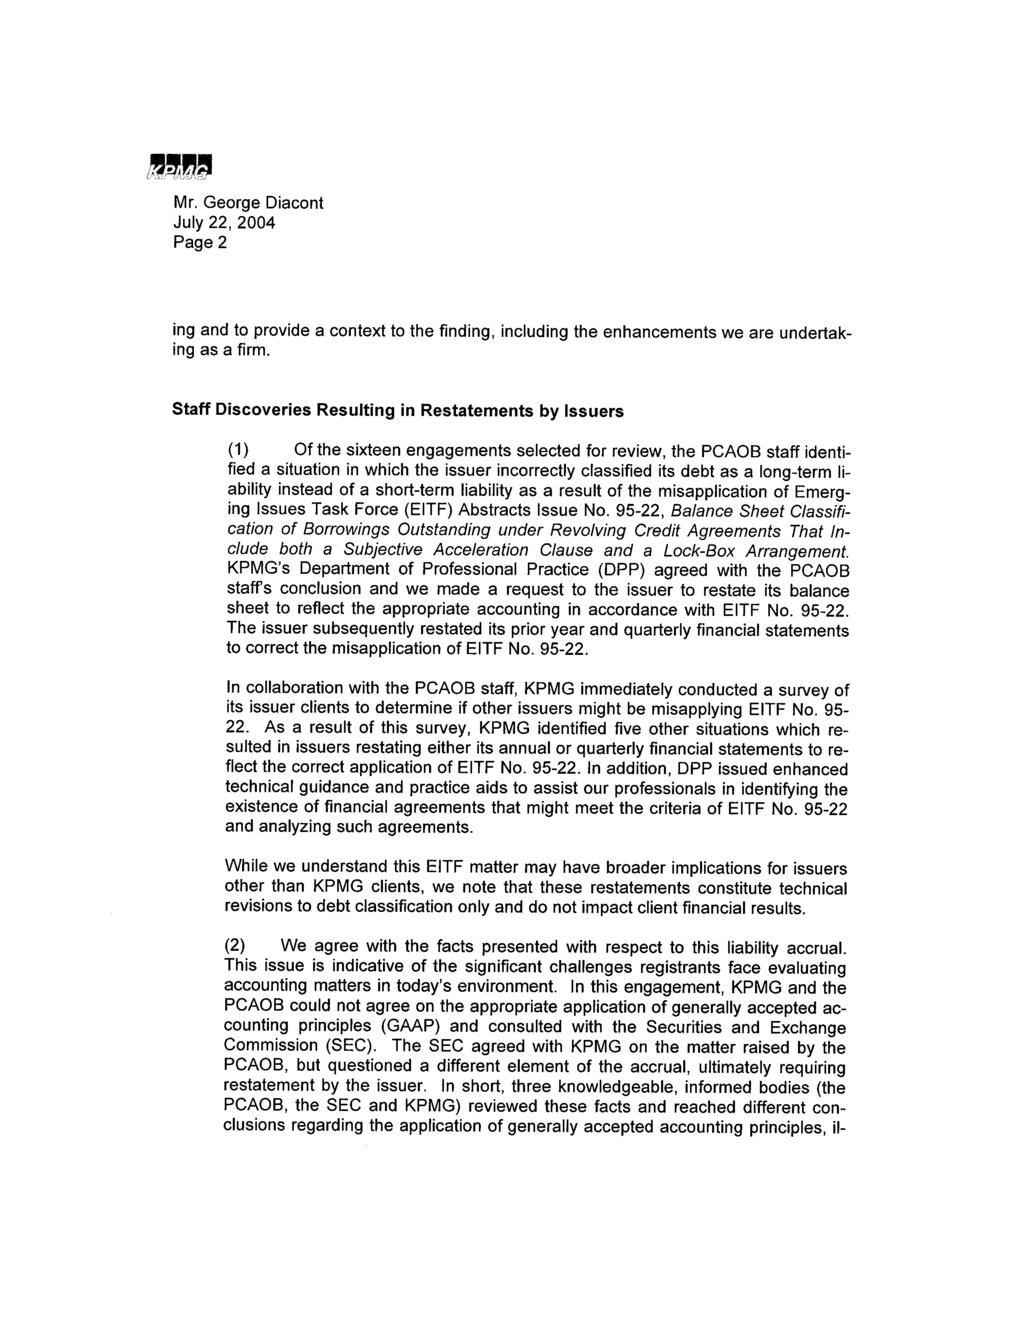 !I' Mr. George Diacont July 22, 2004 Page 2 ing and to provide a context to the finding, including the enhancements we are undertaking as a firm.